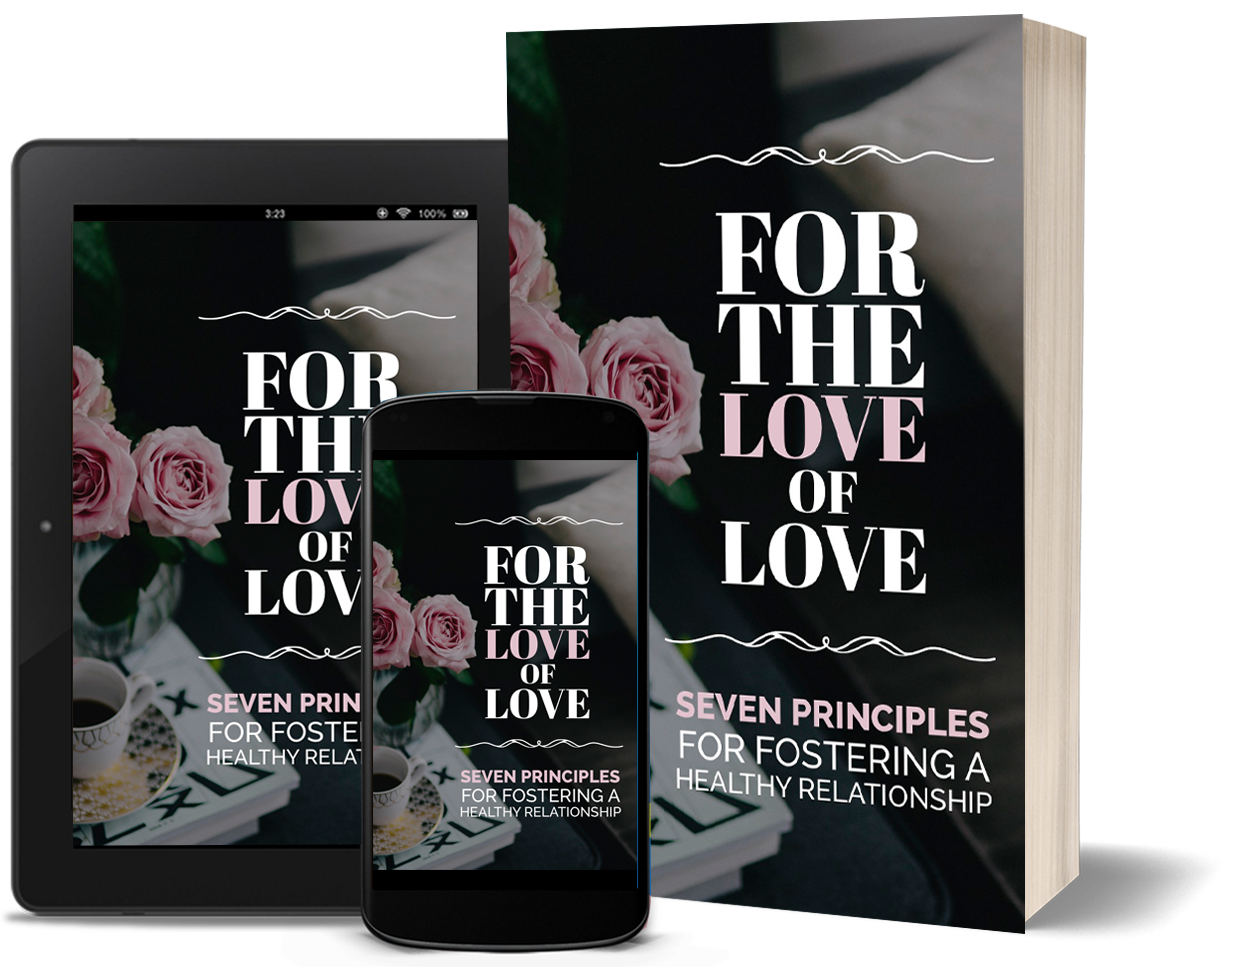 Free eBook titled "For The Love of Love; 7 Principles For Fostering A Healthy Relationship", 62 pages, when you buy Gummbear Grow Hair Grow - Hair Vitamin Gummies with 5,000mcg Biotin now